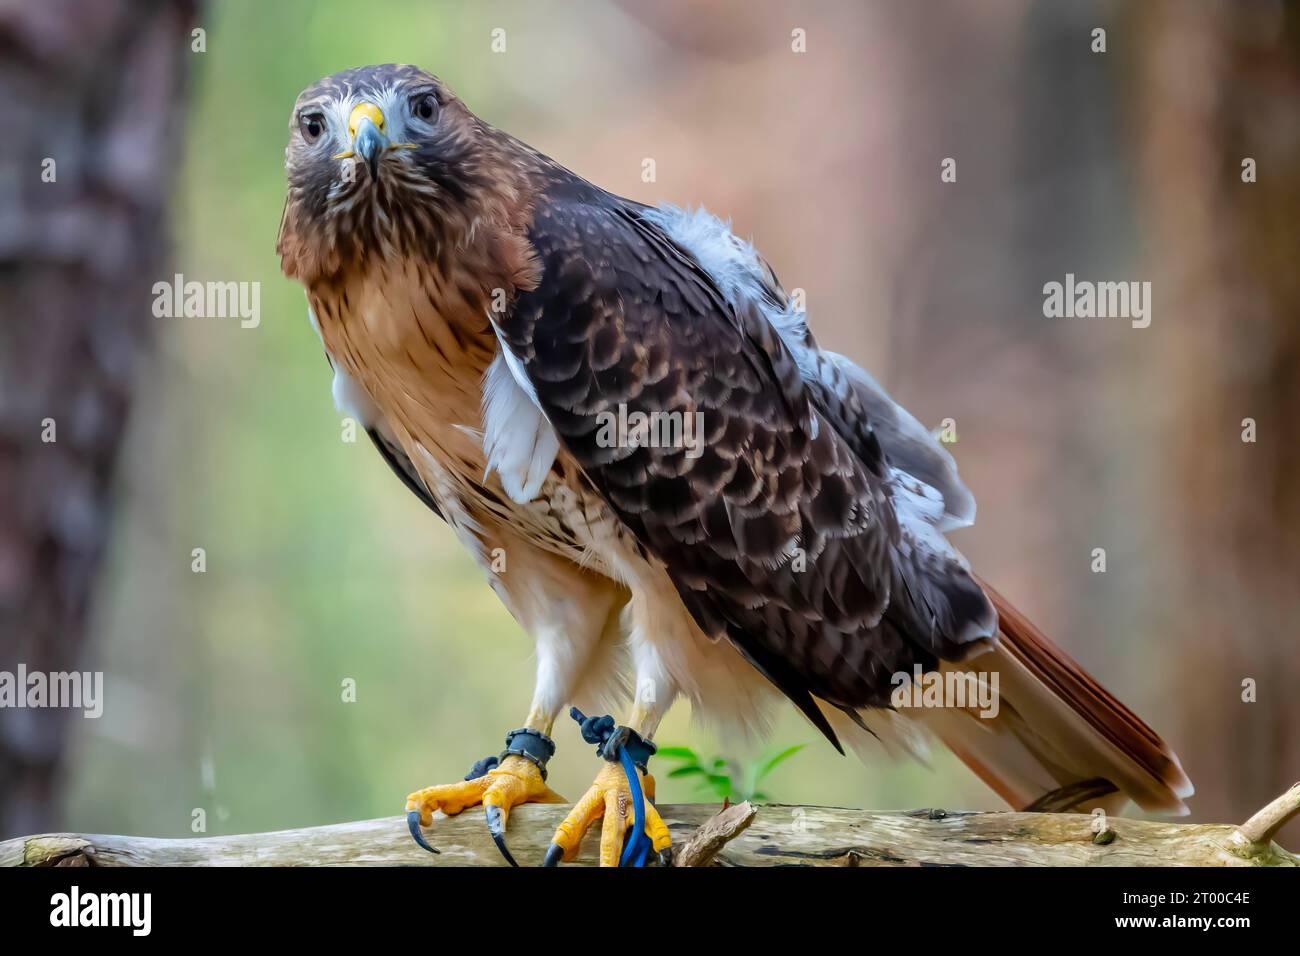 Red-Taled Hawk Sits Outdoors In Its Natural Environment Stock Photo